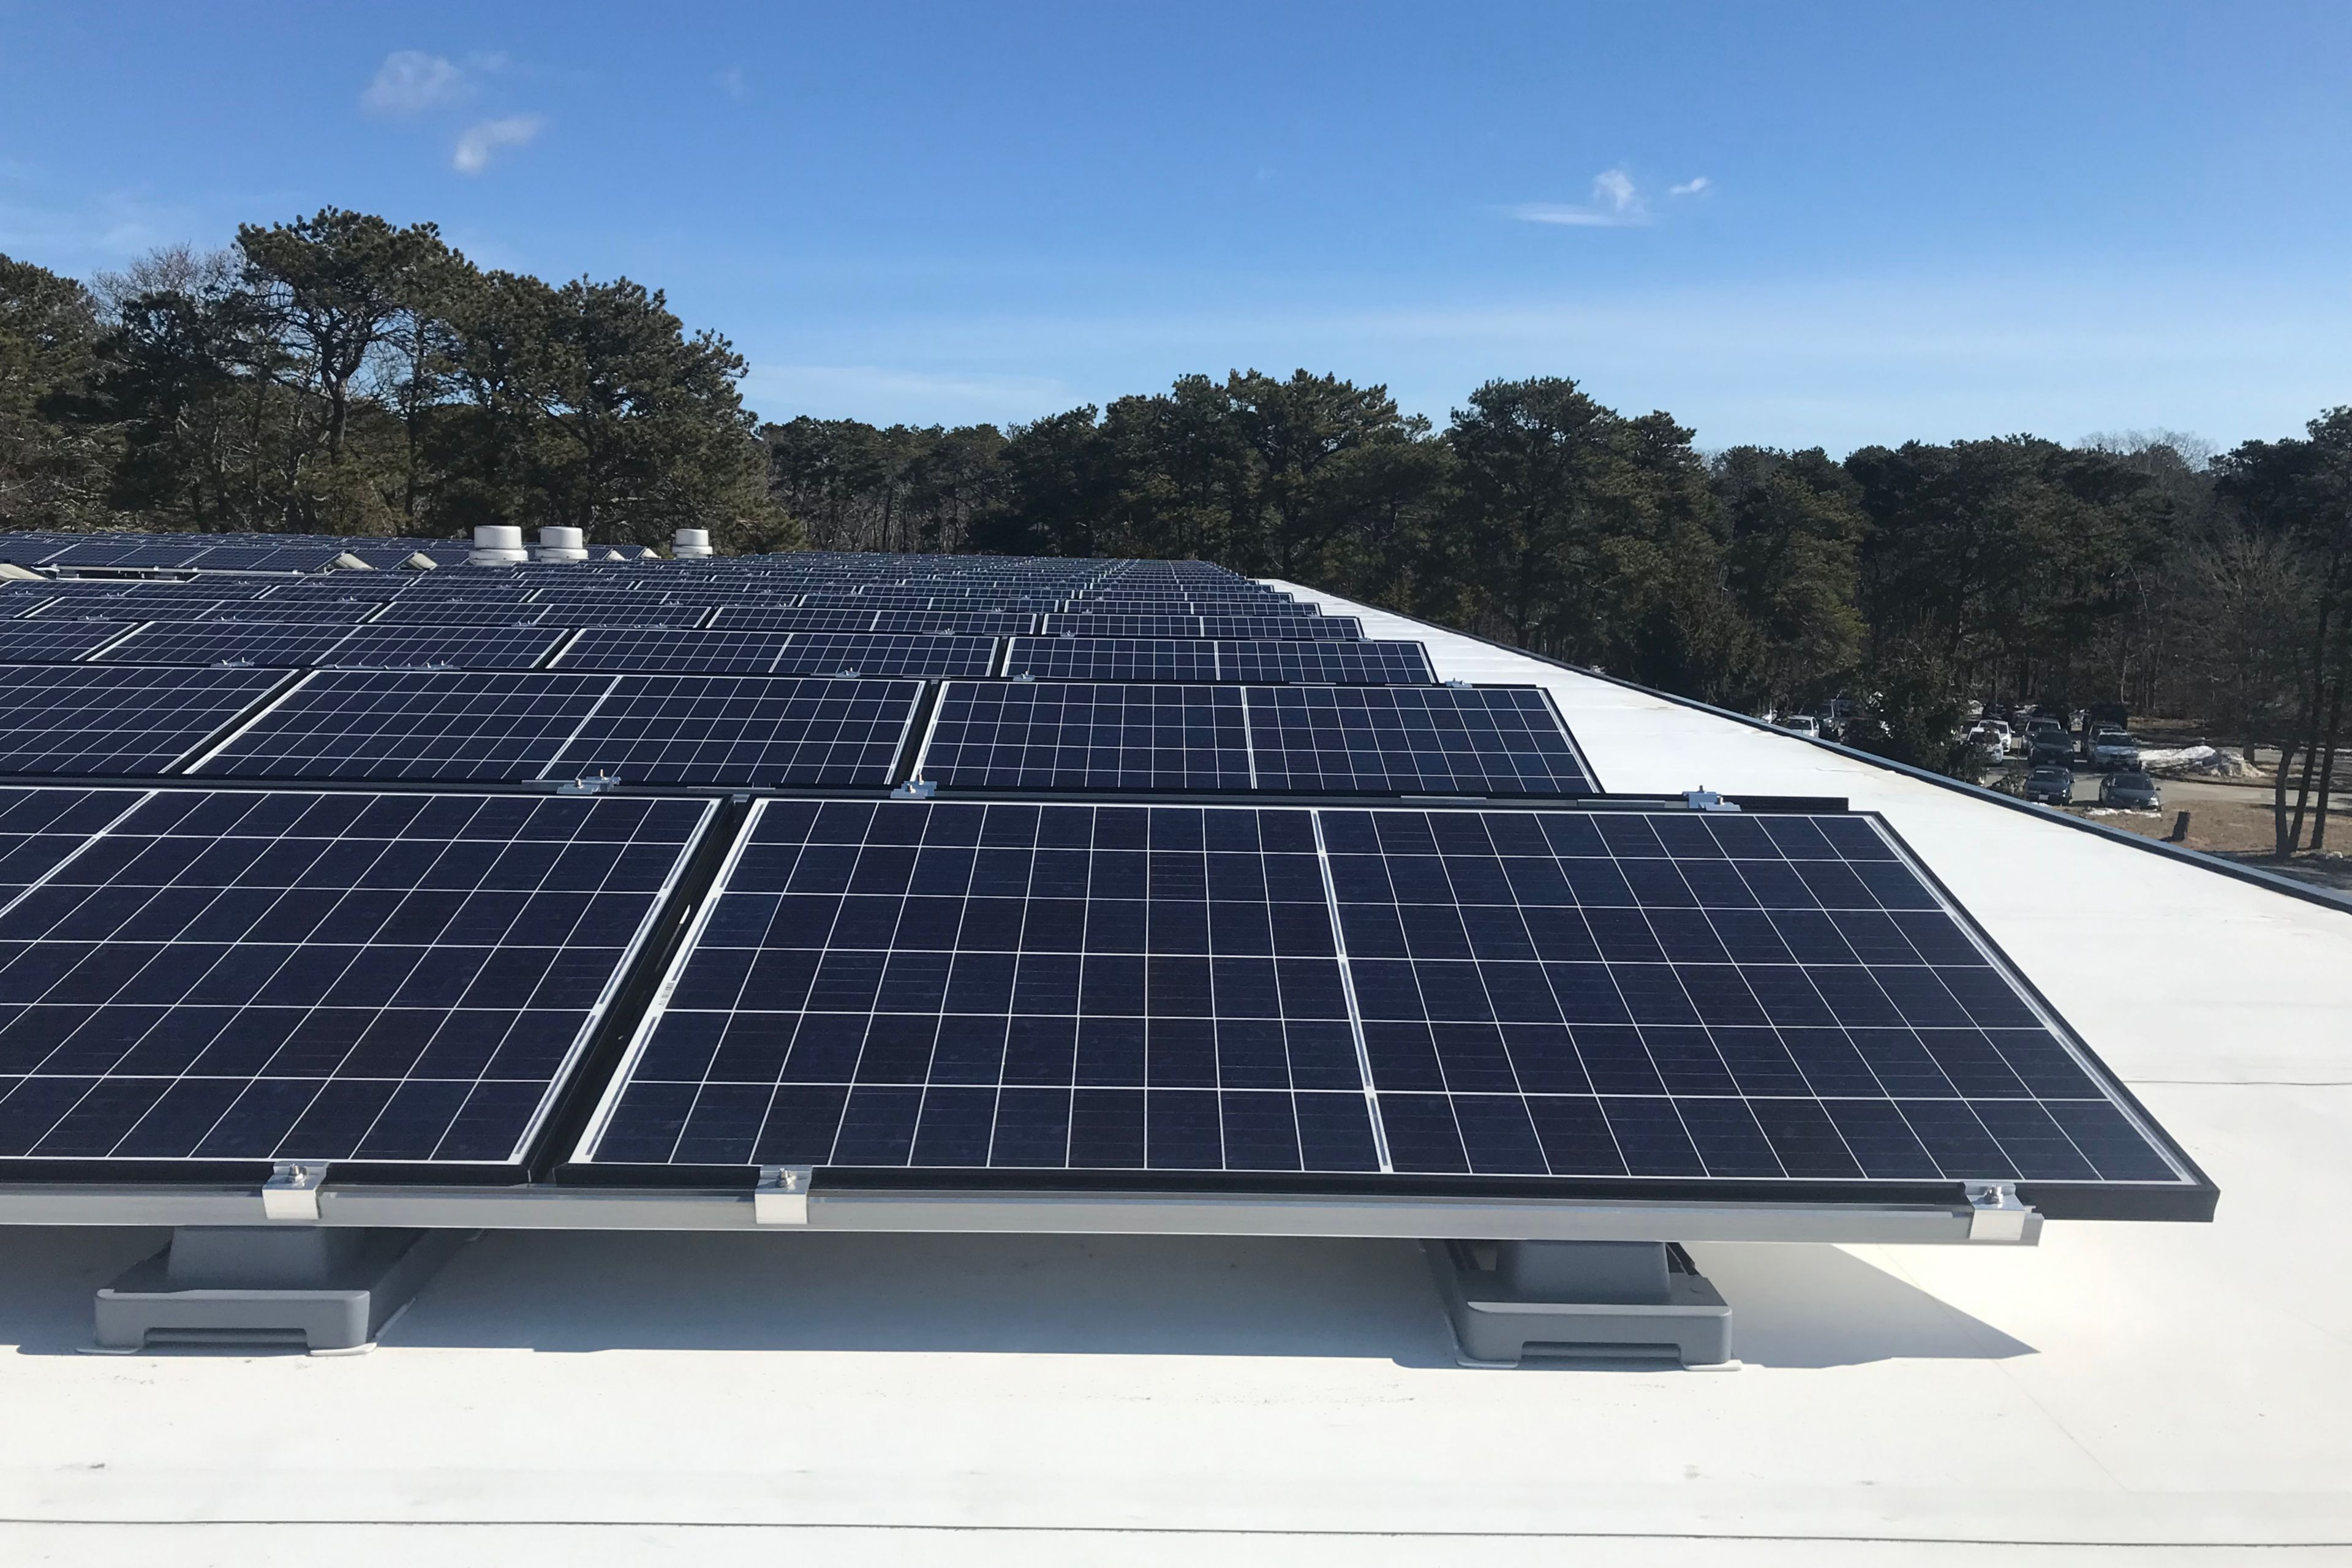 Sika SolarMount-1 on solar roof installed in south configuration in Nauset